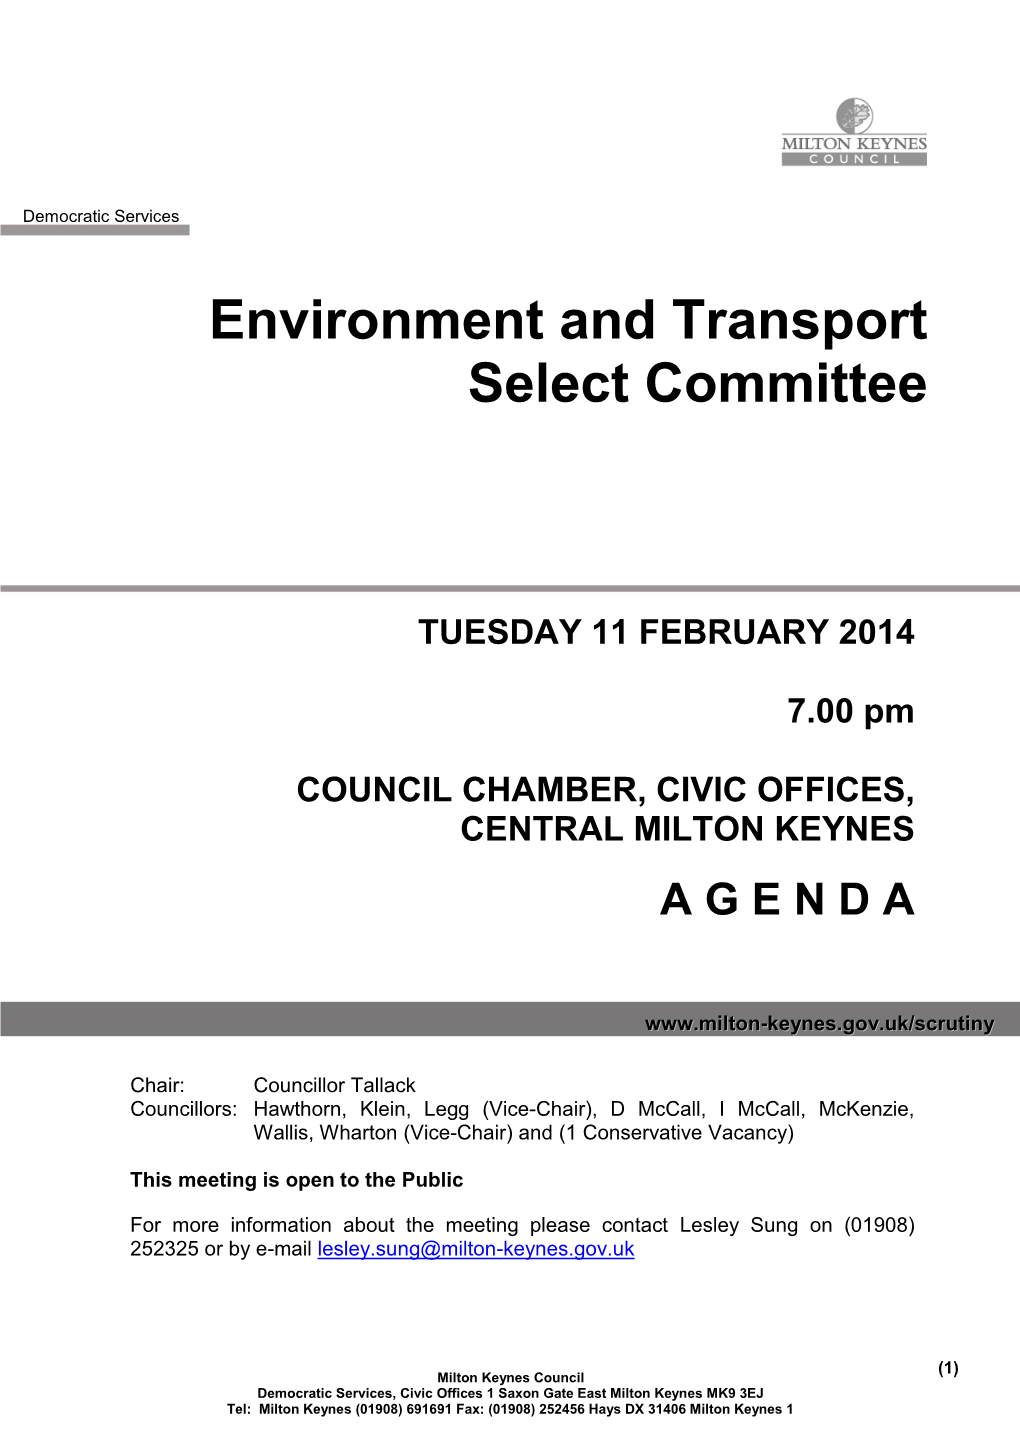 Environment and Transport Select Committee